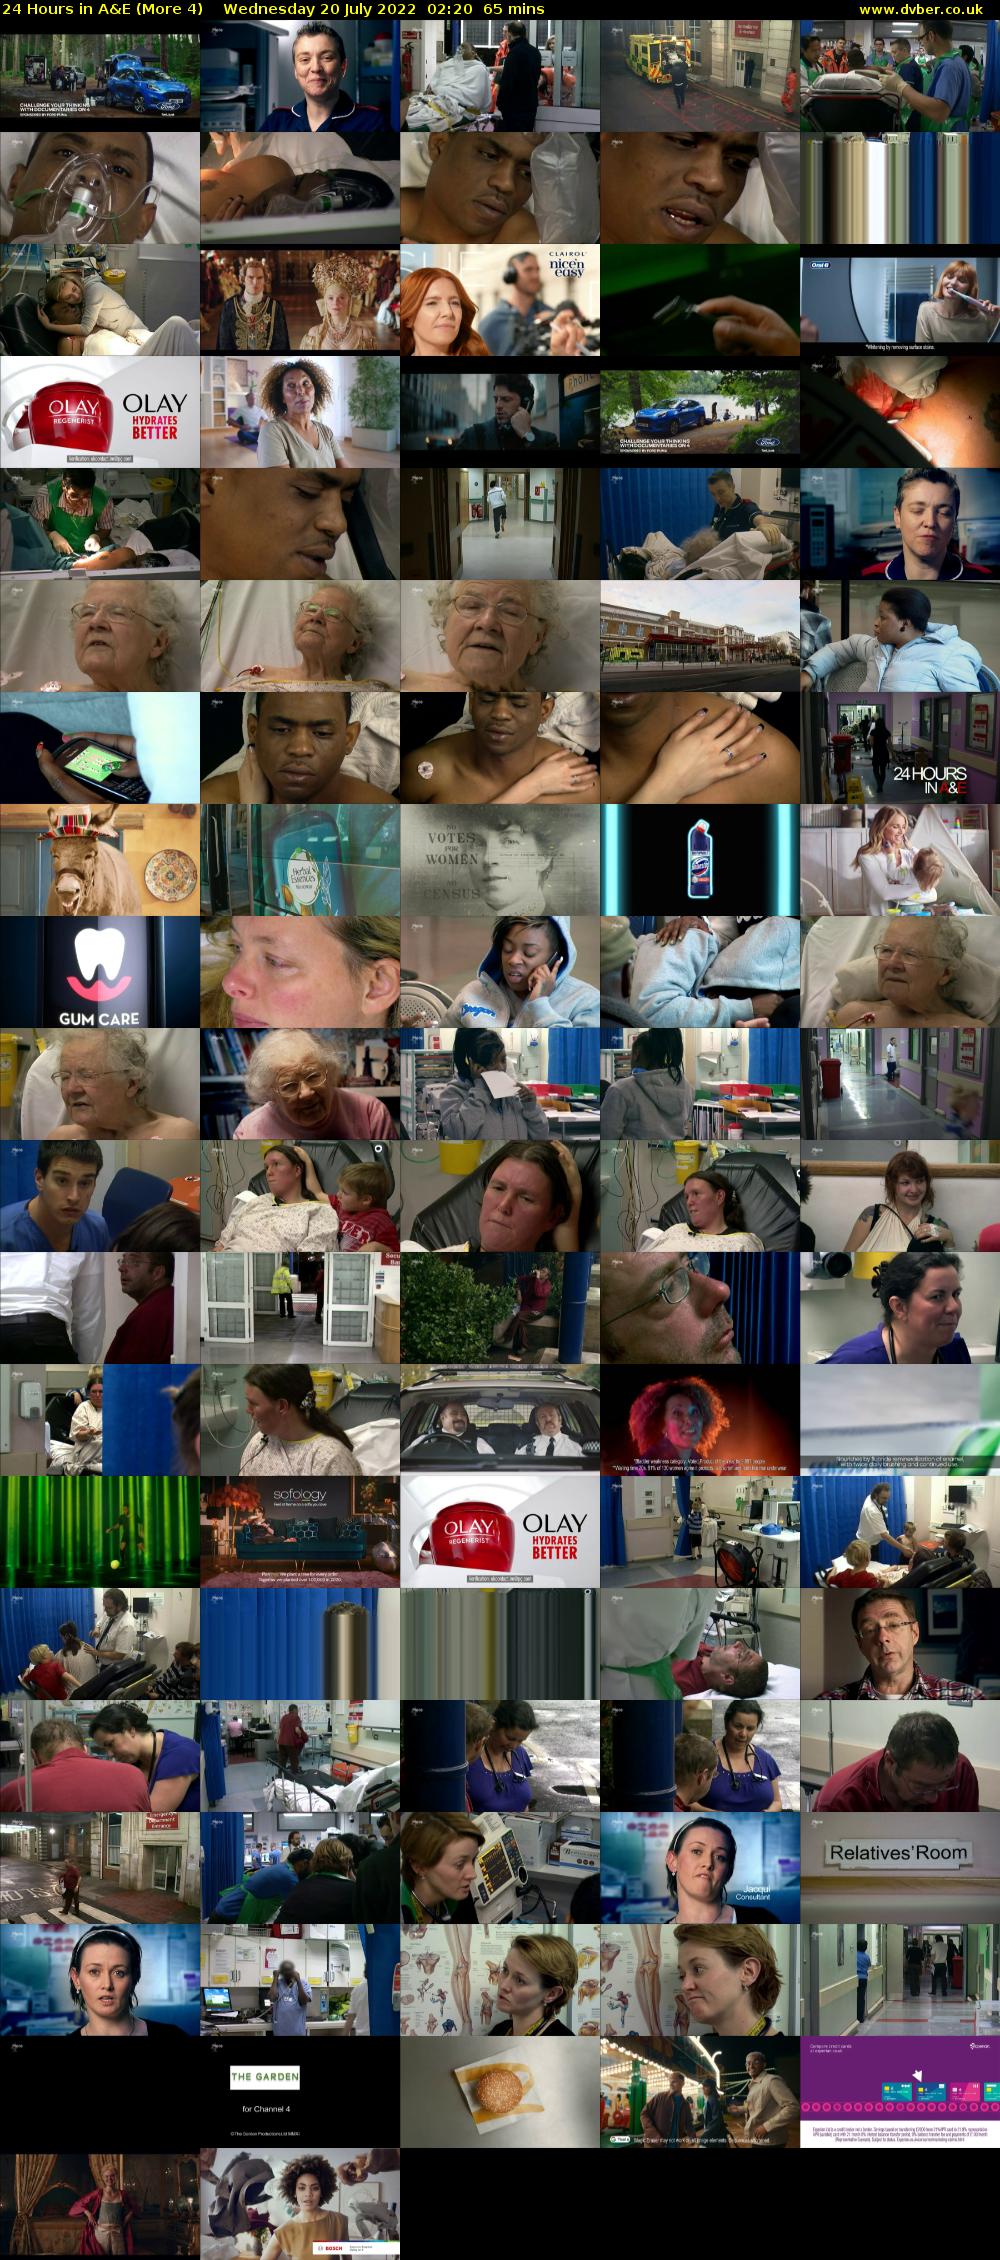 24 Hours in A&E (More 4) Wednesday 20 July 2022 02:20 - 03:25